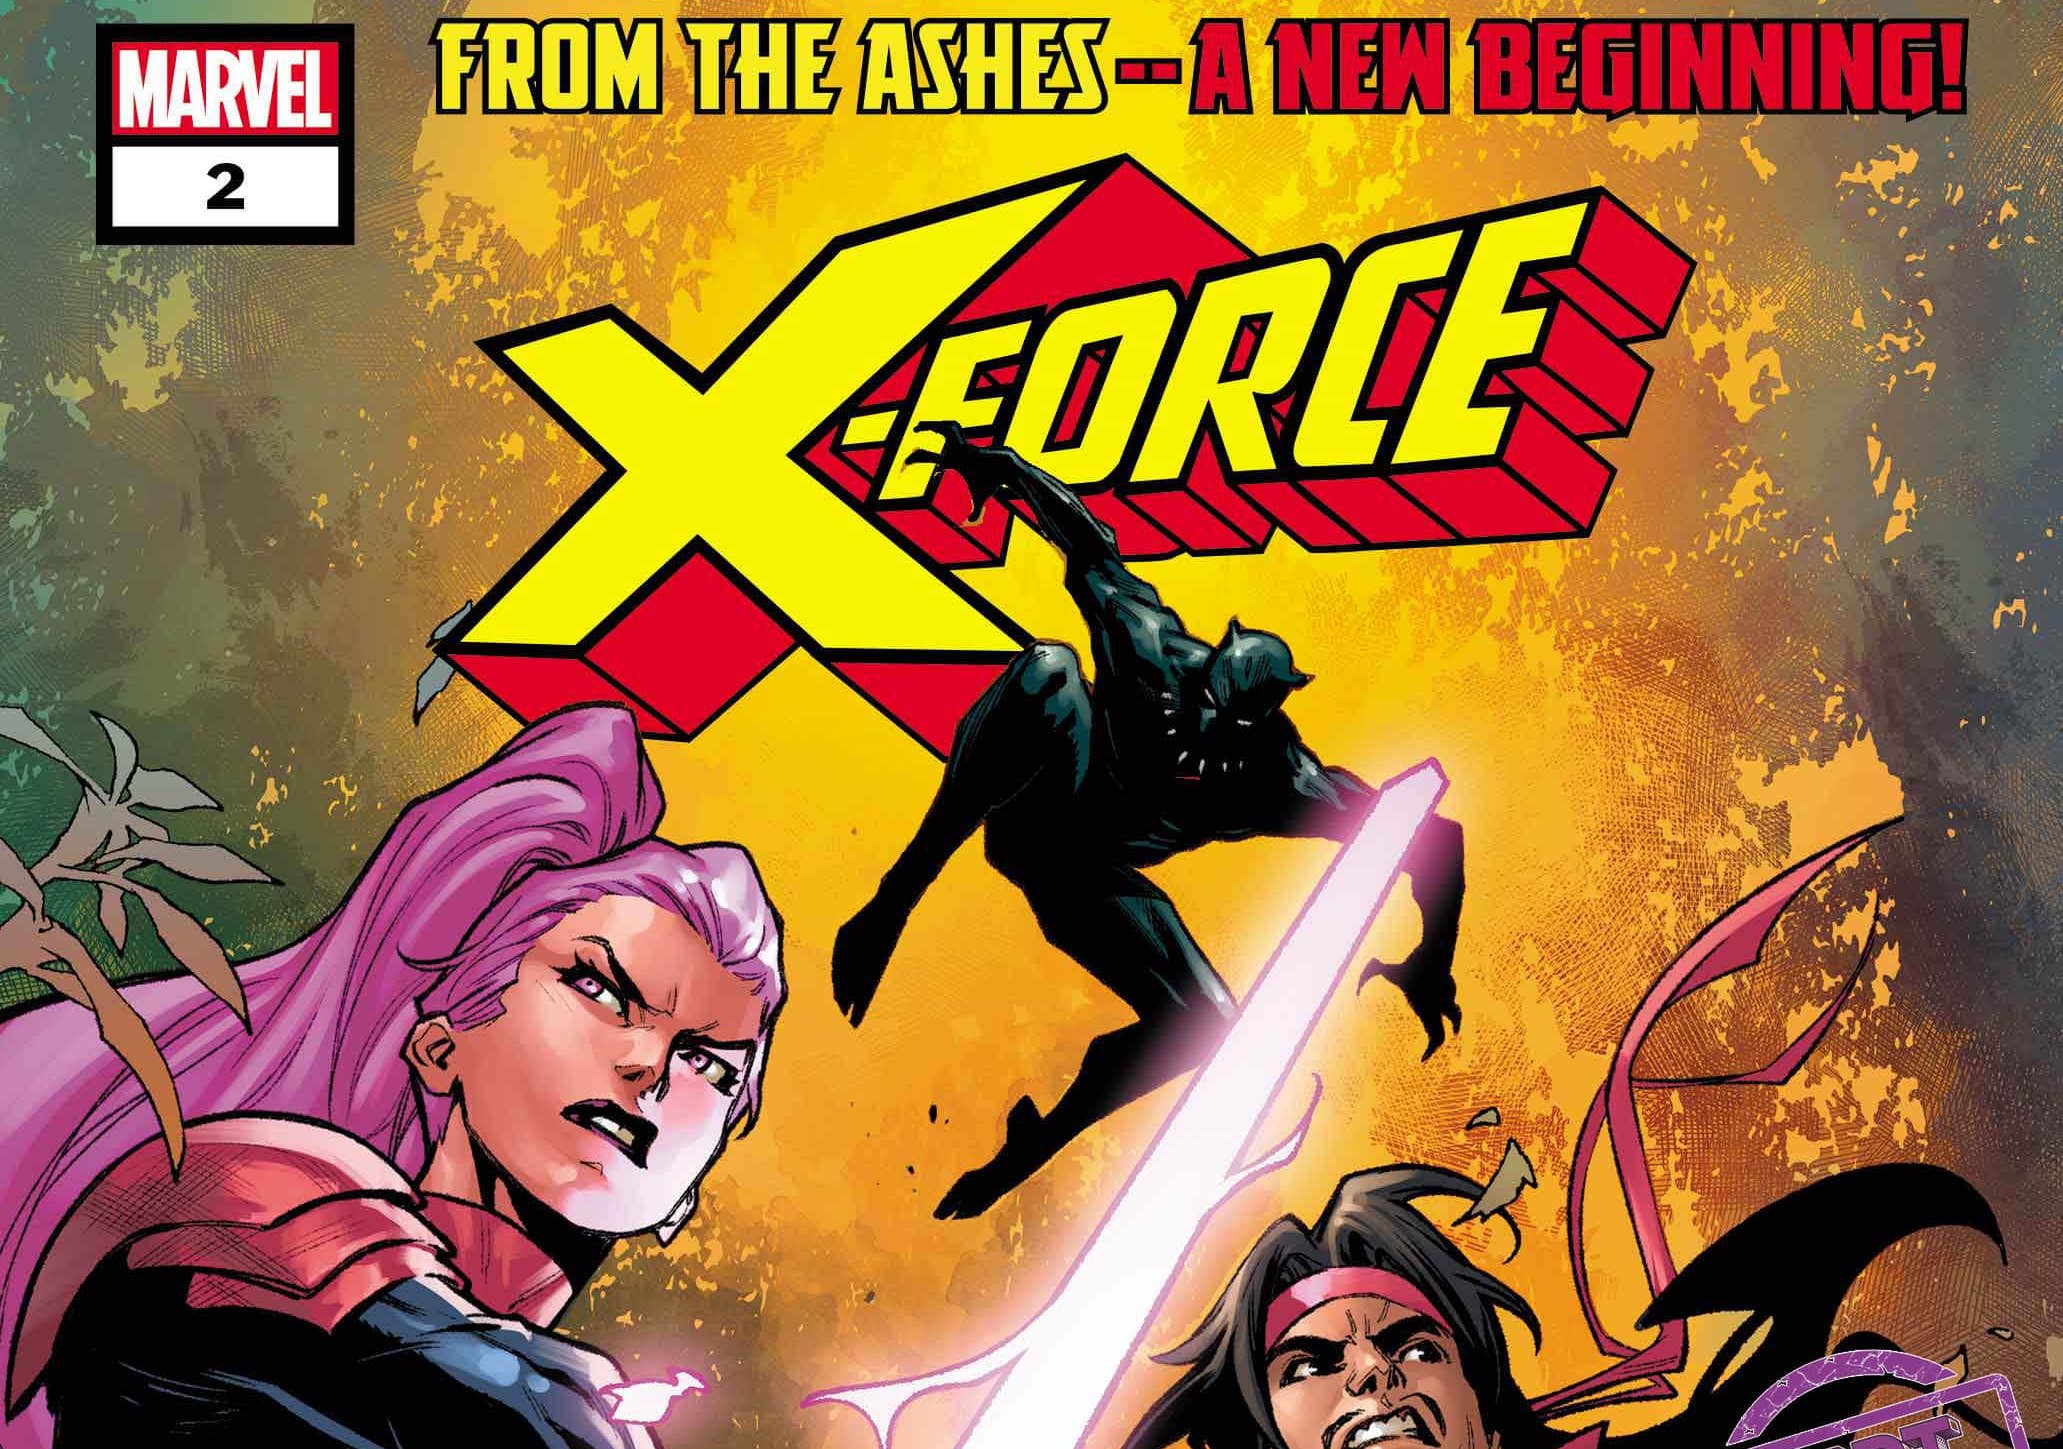 The X-Force head to Wakanda in exclusive 'X-Force' #2 preview